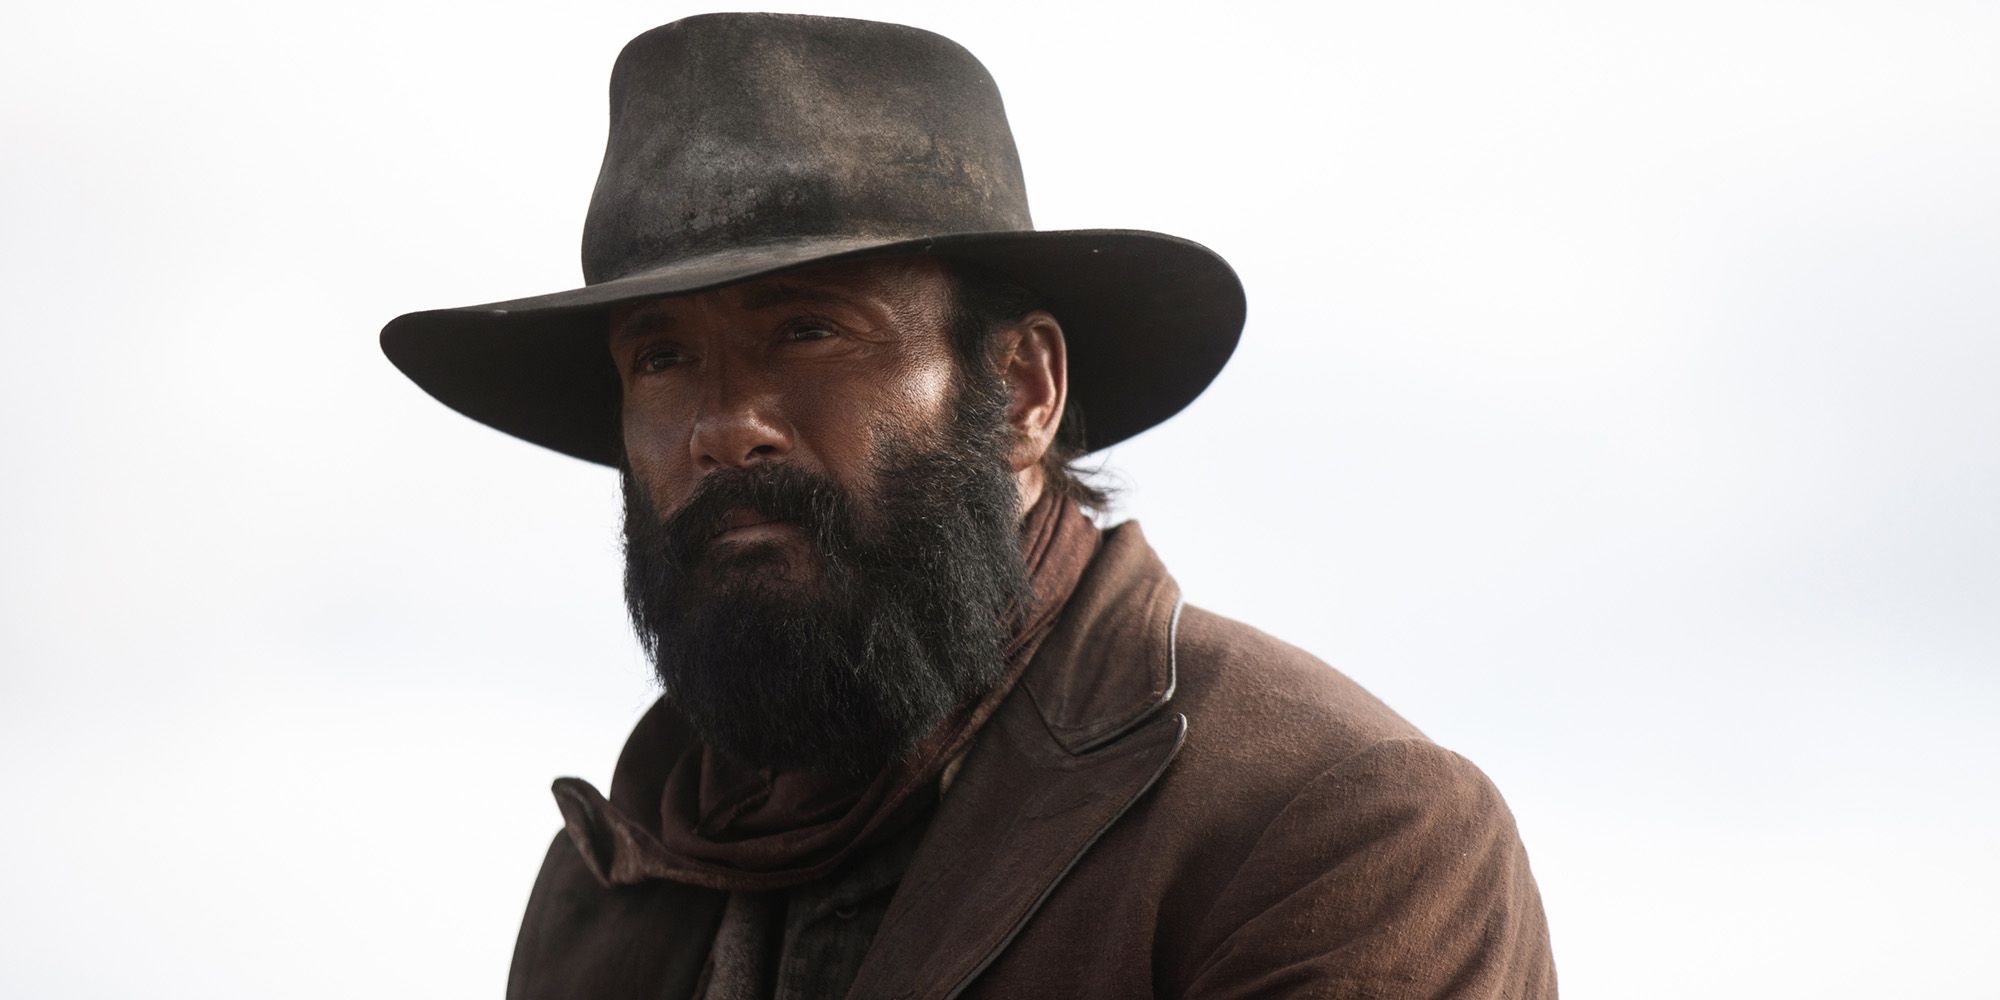 Tim McGraw as James of the Paramount original series 1883 looking out in the open